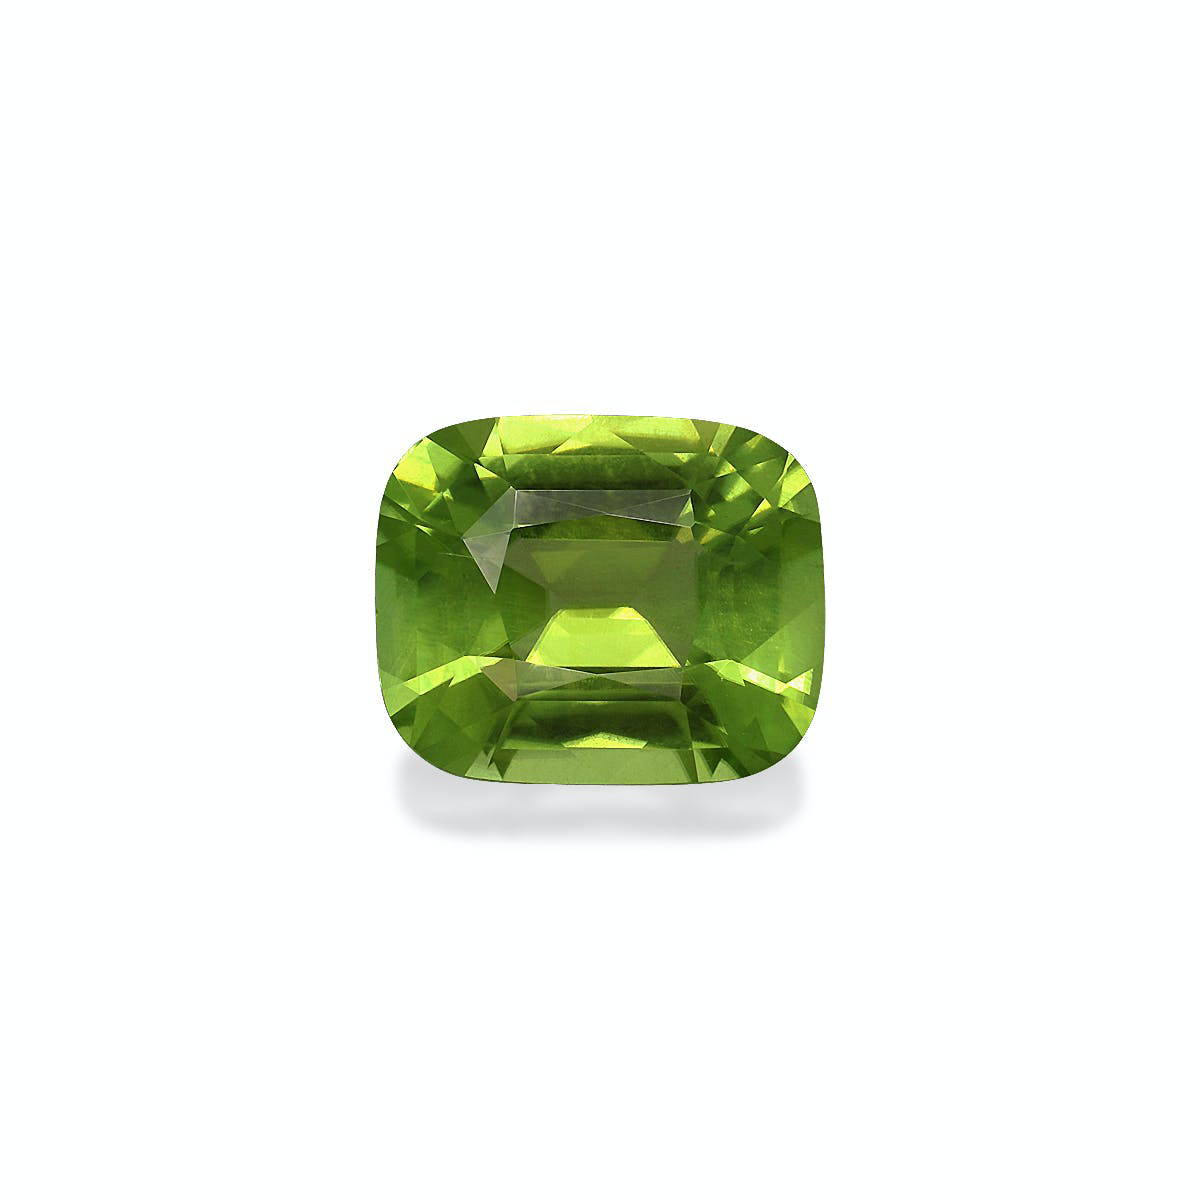 Picture of Pistachio Green Peridot 4.57ct - 11x9mm (PD0114)